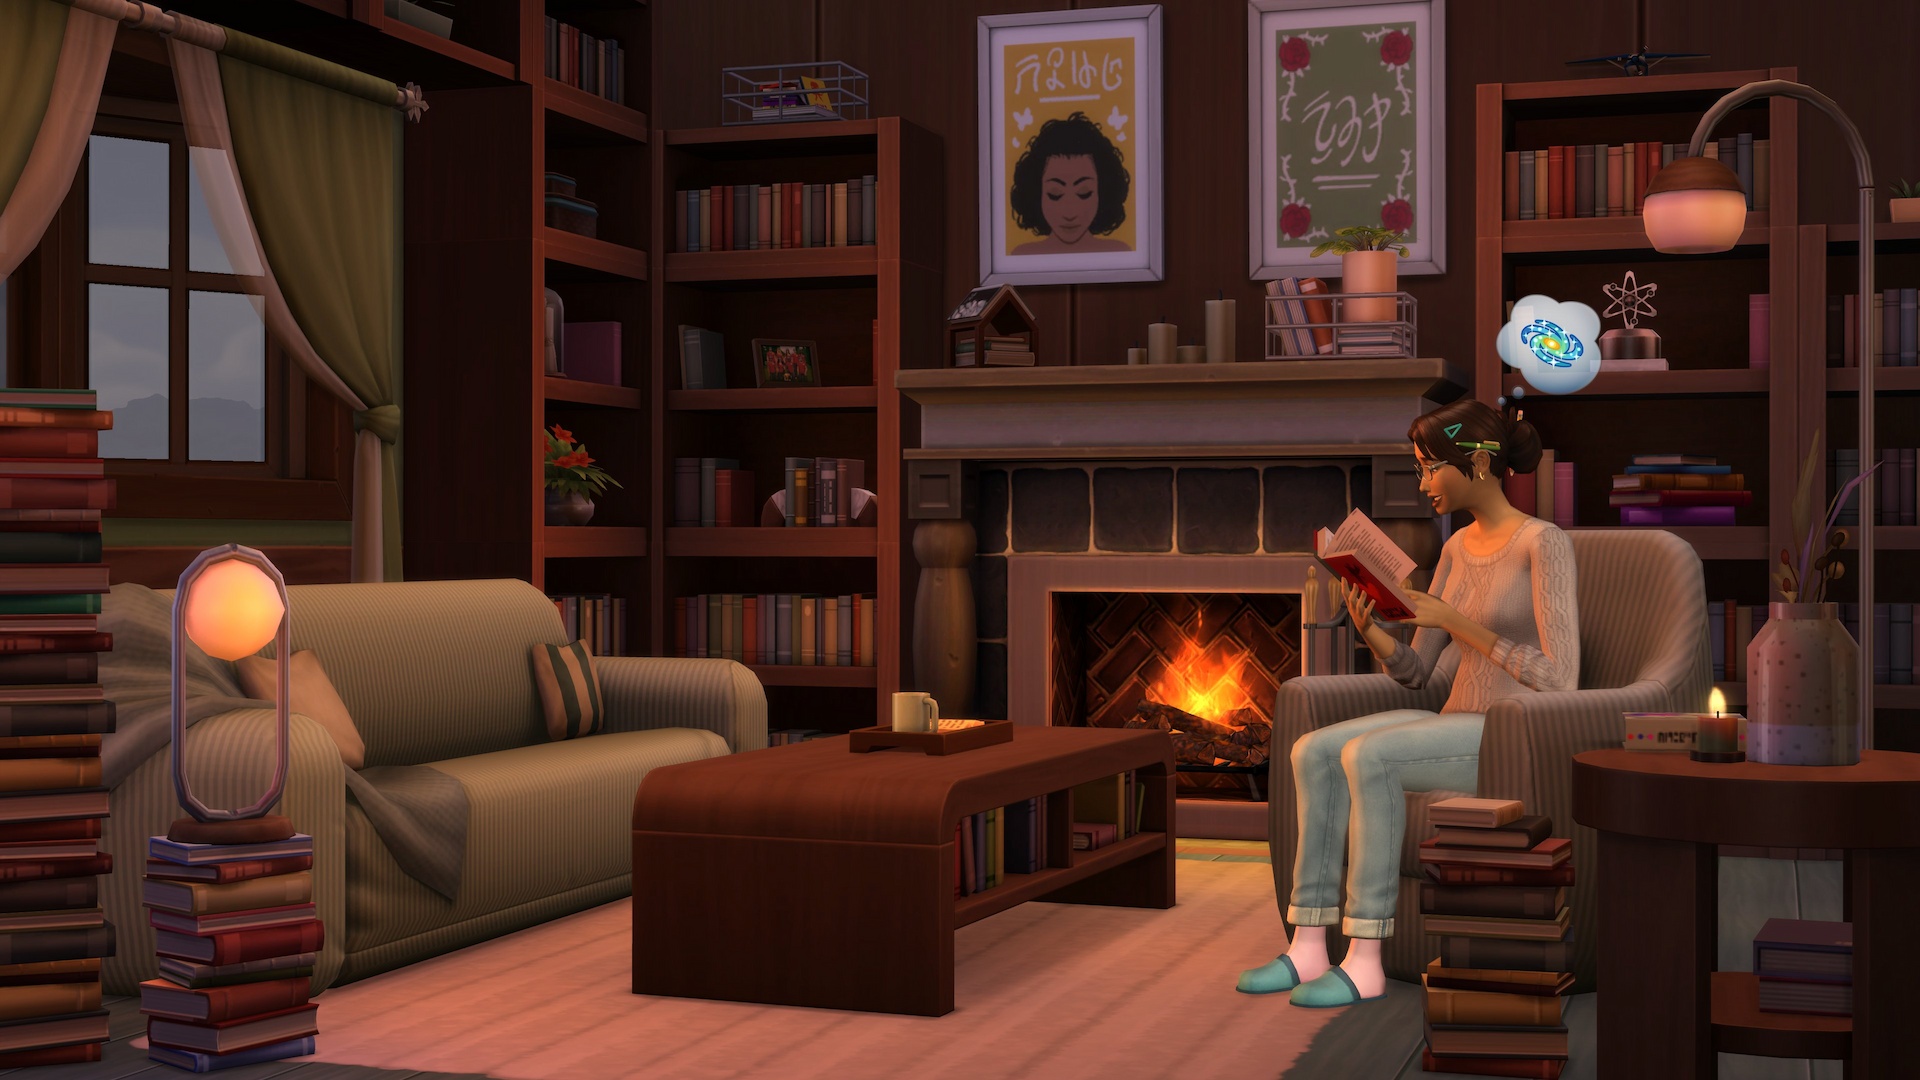 A Sim from The Sims 4 sitting on her sofa reading a book